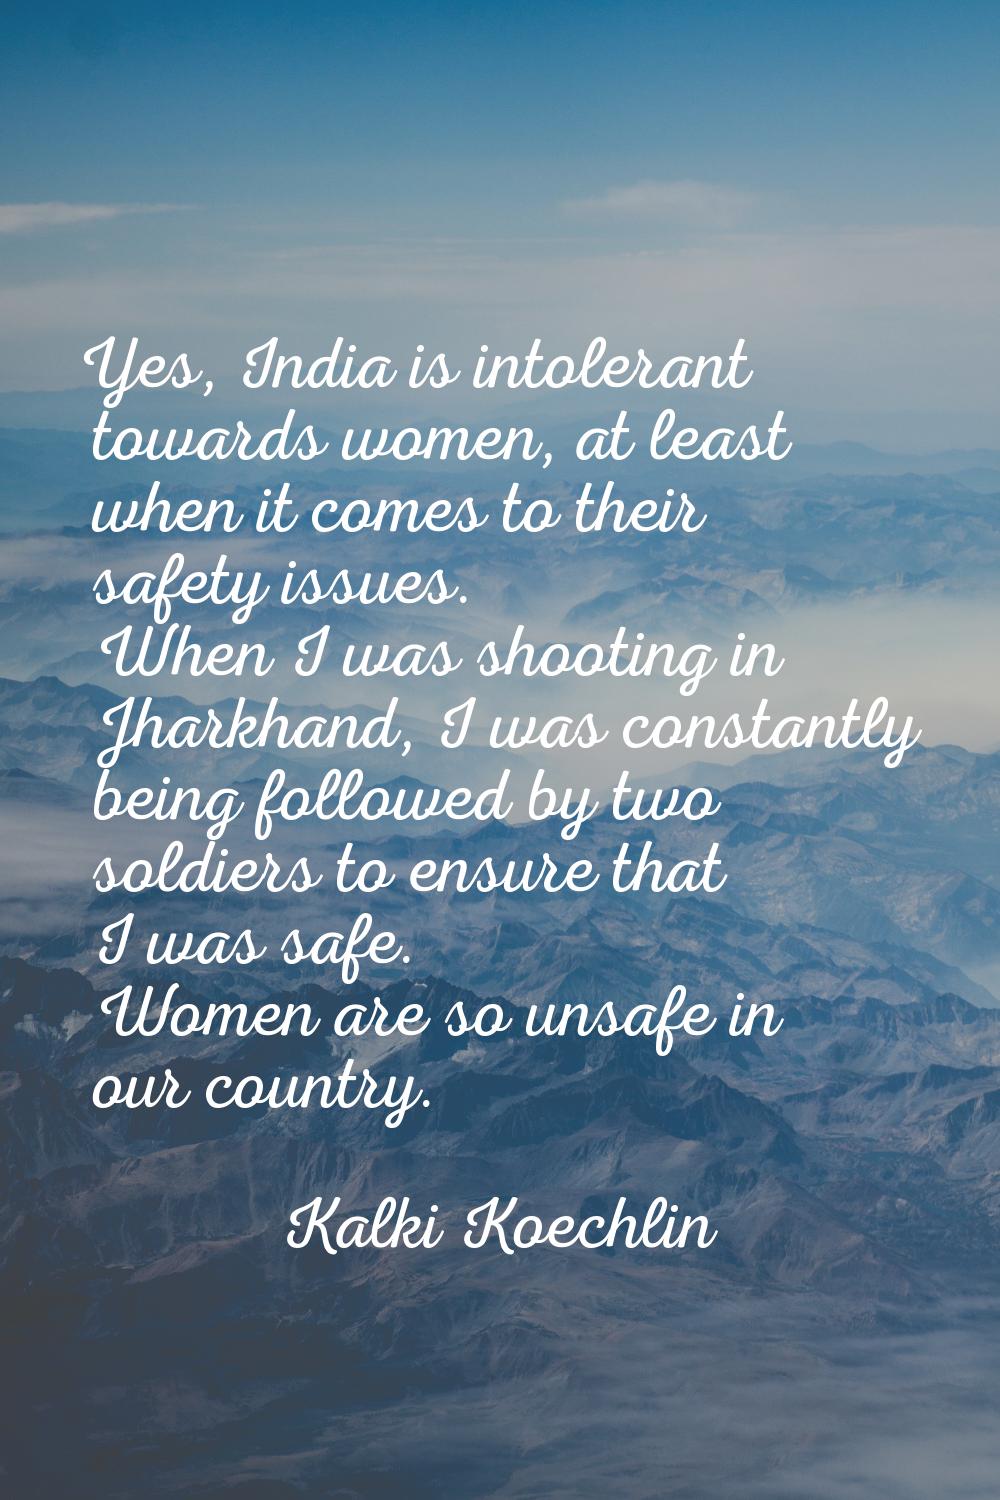 Yes, India is intolerant towards women, at least when it comes to their safety issues. When I was s